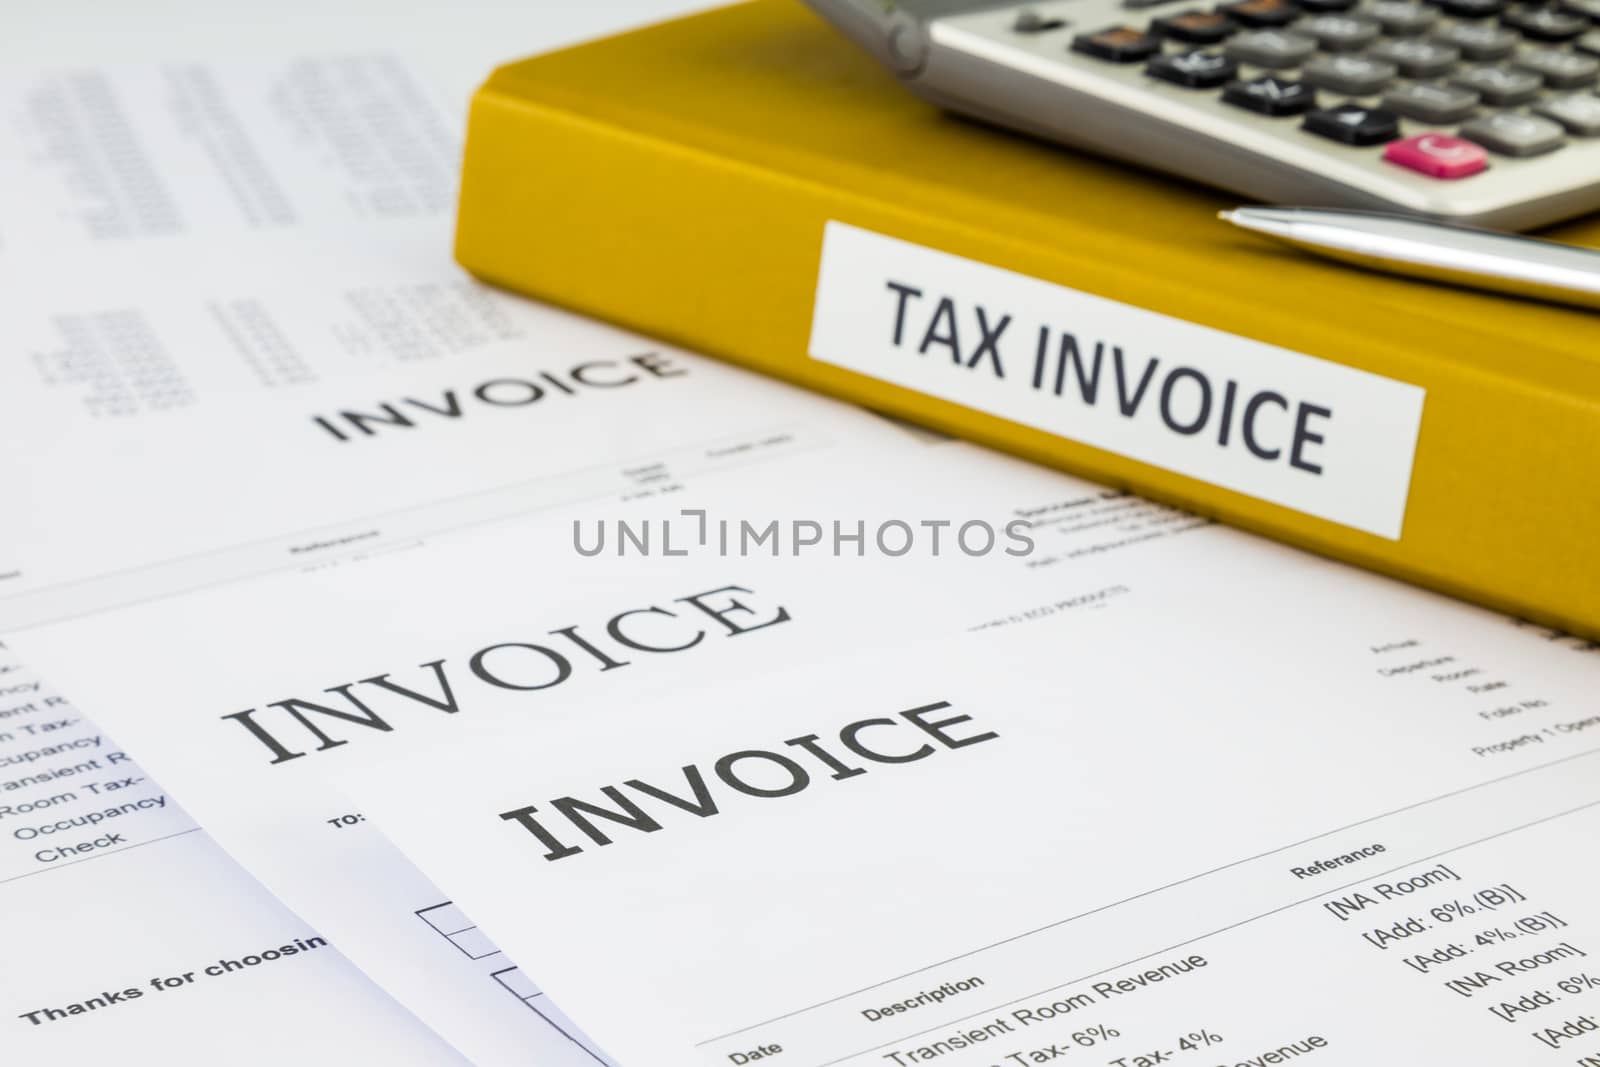 Binder of tax invoice documents with bills, purchase orders and business invoices on background